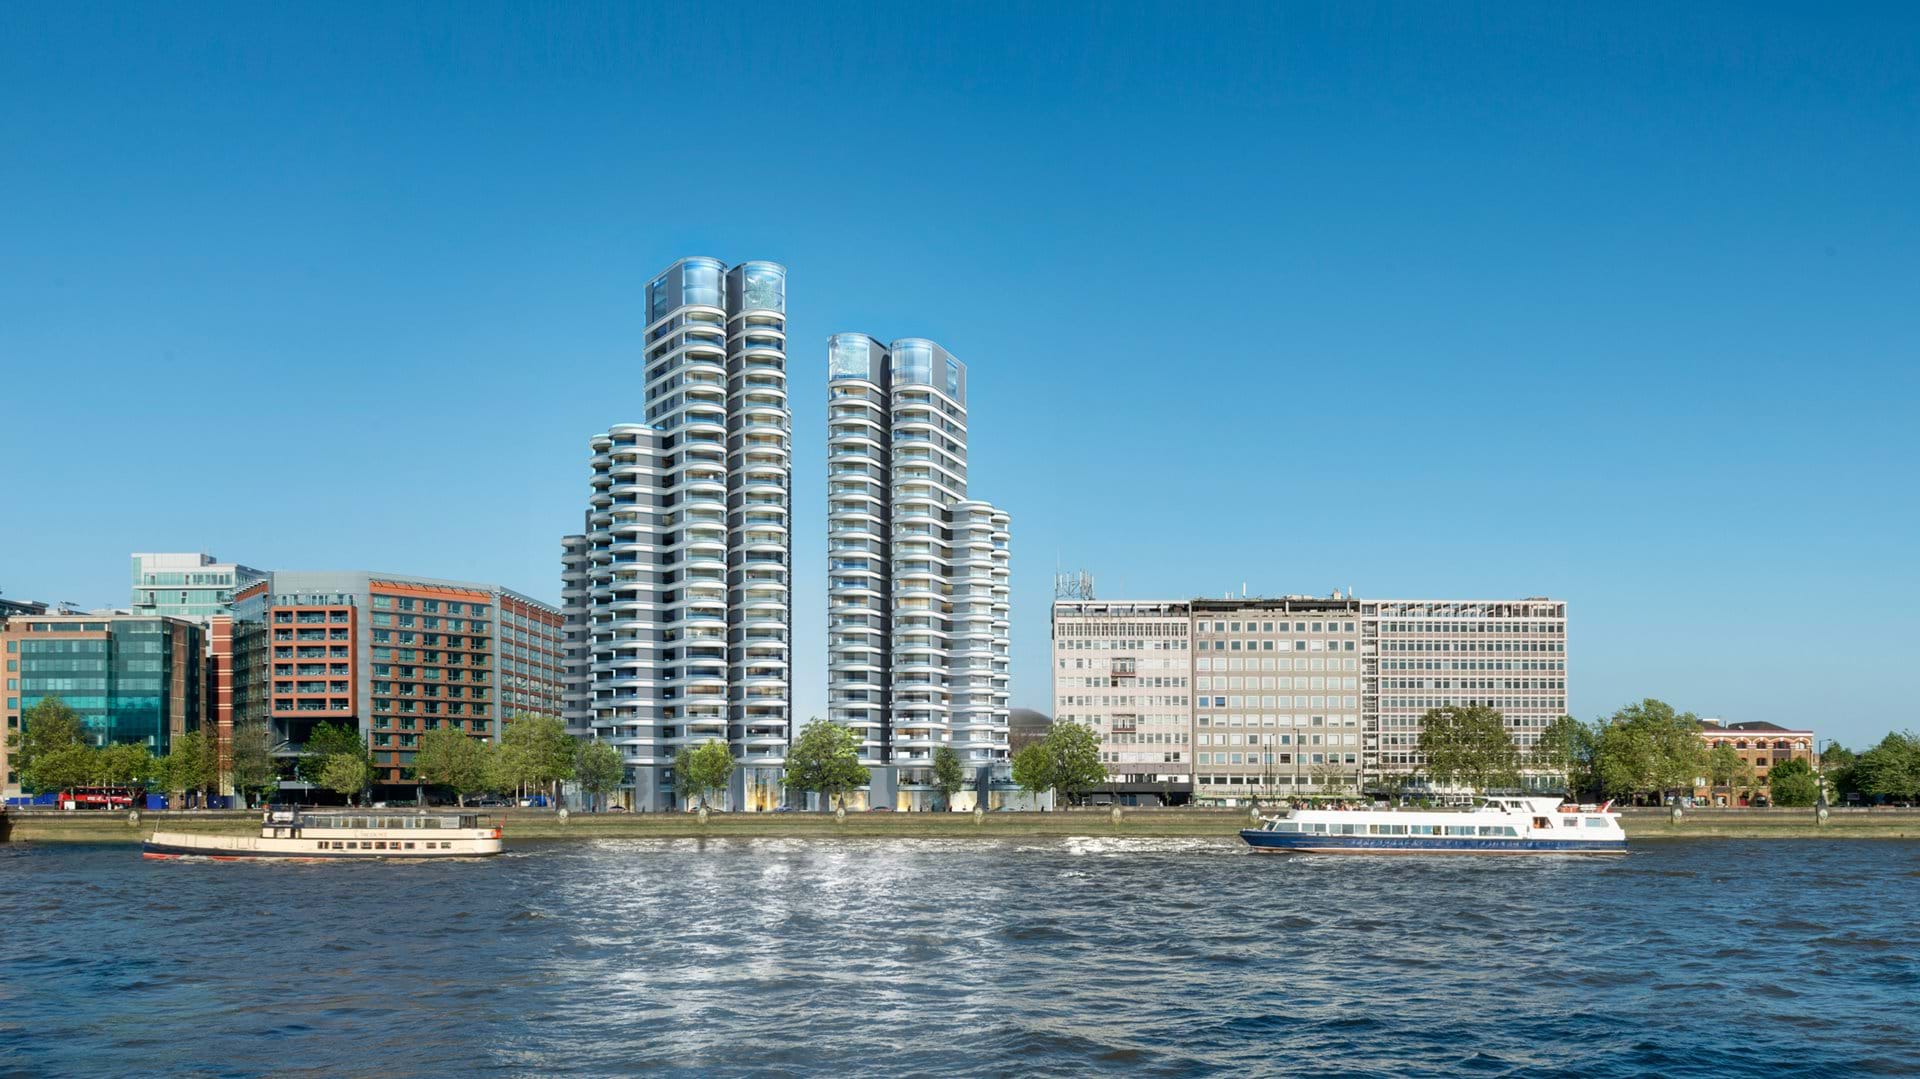 he Corniche is a mixed-use development of three landmark towers along the Albert Embankment on the south bank of the River Thames, opposite the Houses of Parliament where a 53-year old coach driver has been killed by a window which fell on him from height